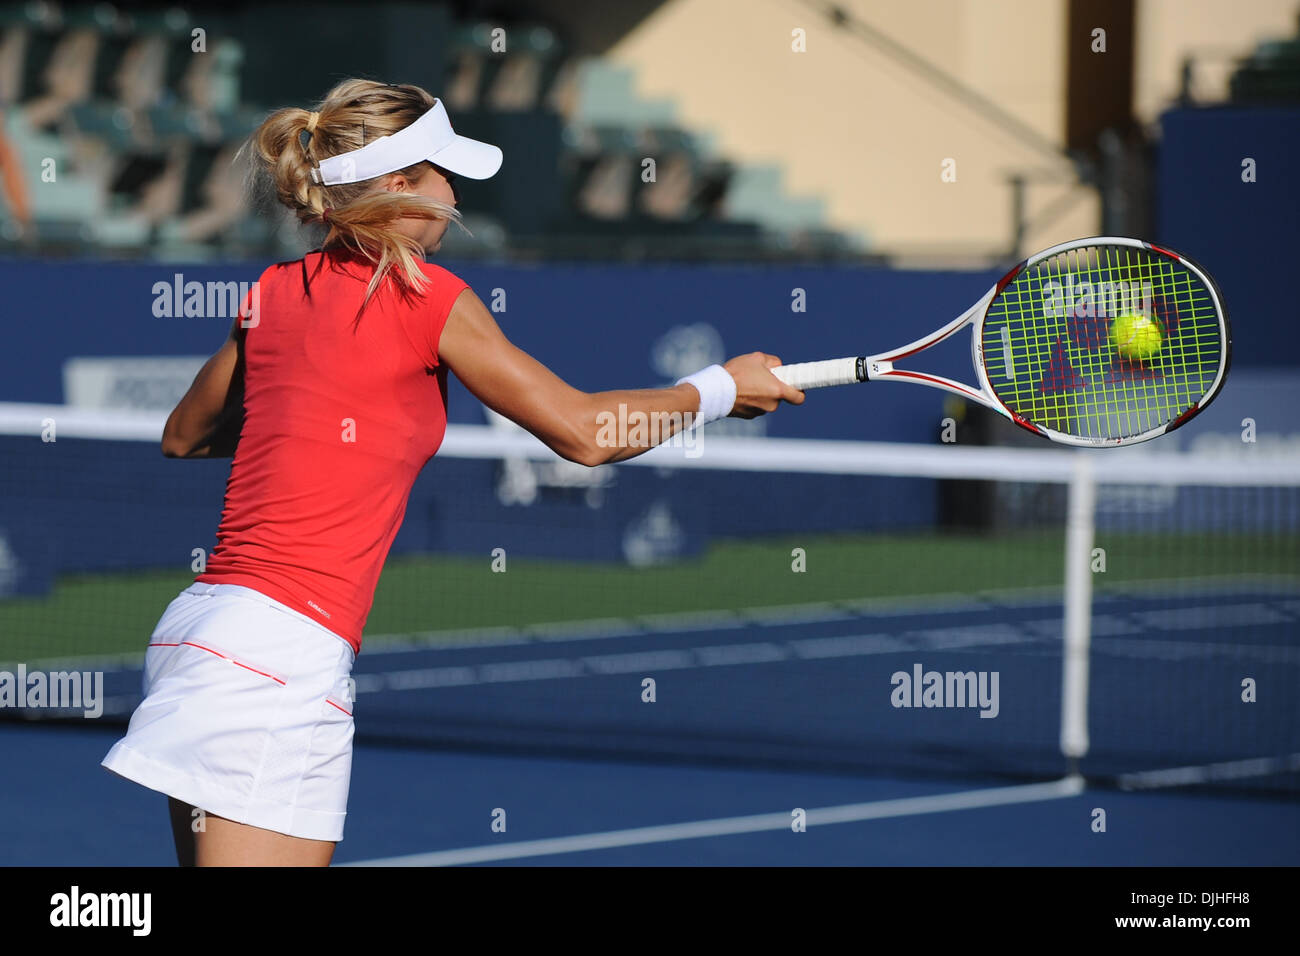 July 29, 2010 - Stanford, California, United States of America - 29 July 2010: Maria Kirilenko (RUS) competes during doubles action at the Bank of the West Classic at the Taube Family Tennis Center in Stanford, CA.  Kirilenko and Victoria Azarenka beat Shahar Peer and Alisa Kleybanova 6-3, 4-6, 10-3..Mandatory Credit: Matt Cohen / Southcreek Global (Credit Image: © Southcreek Globa Stock Photo